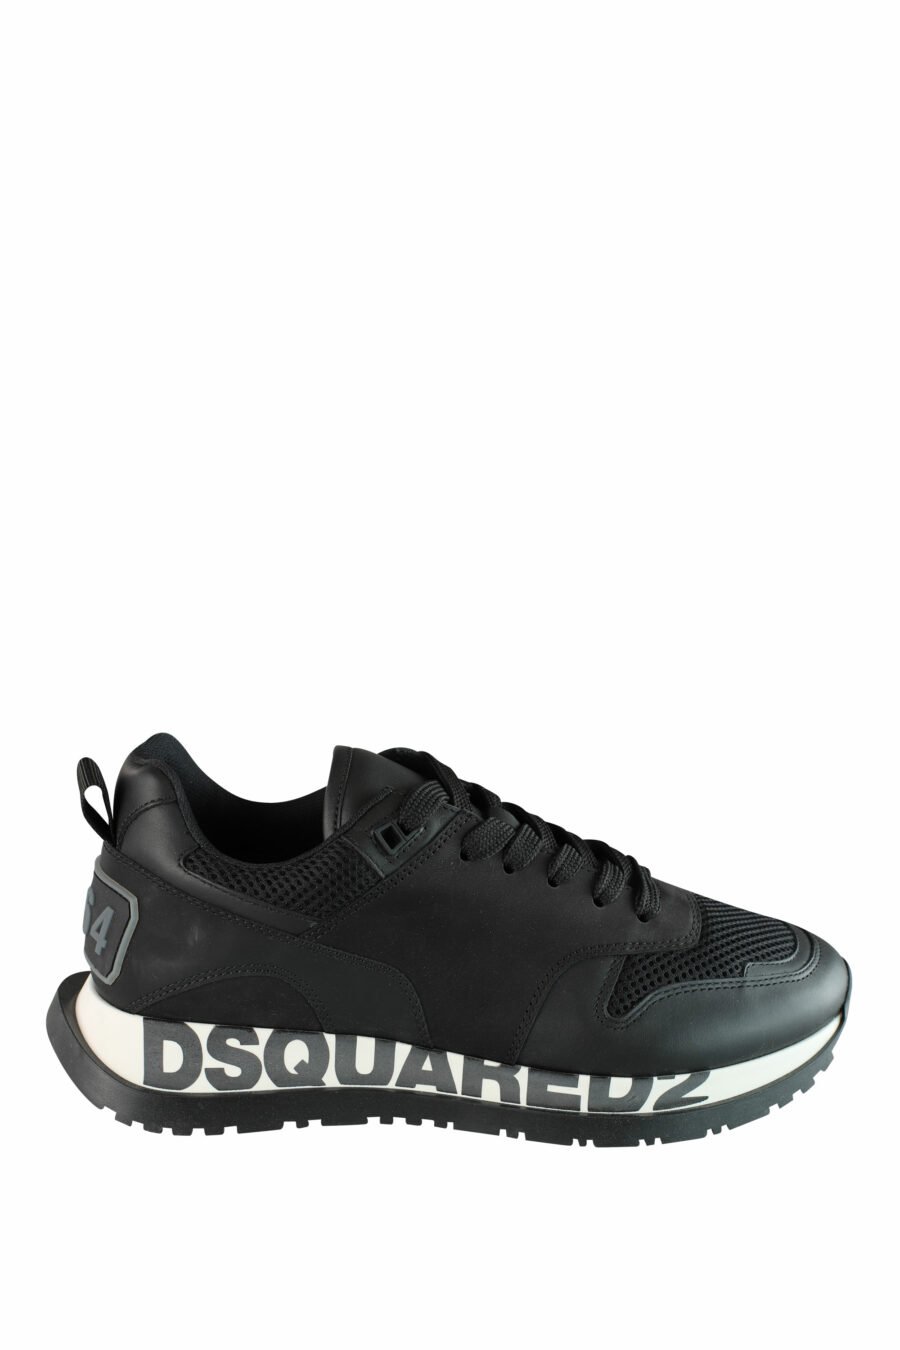 Black running shoes with white sole and black logo - IMG 1430